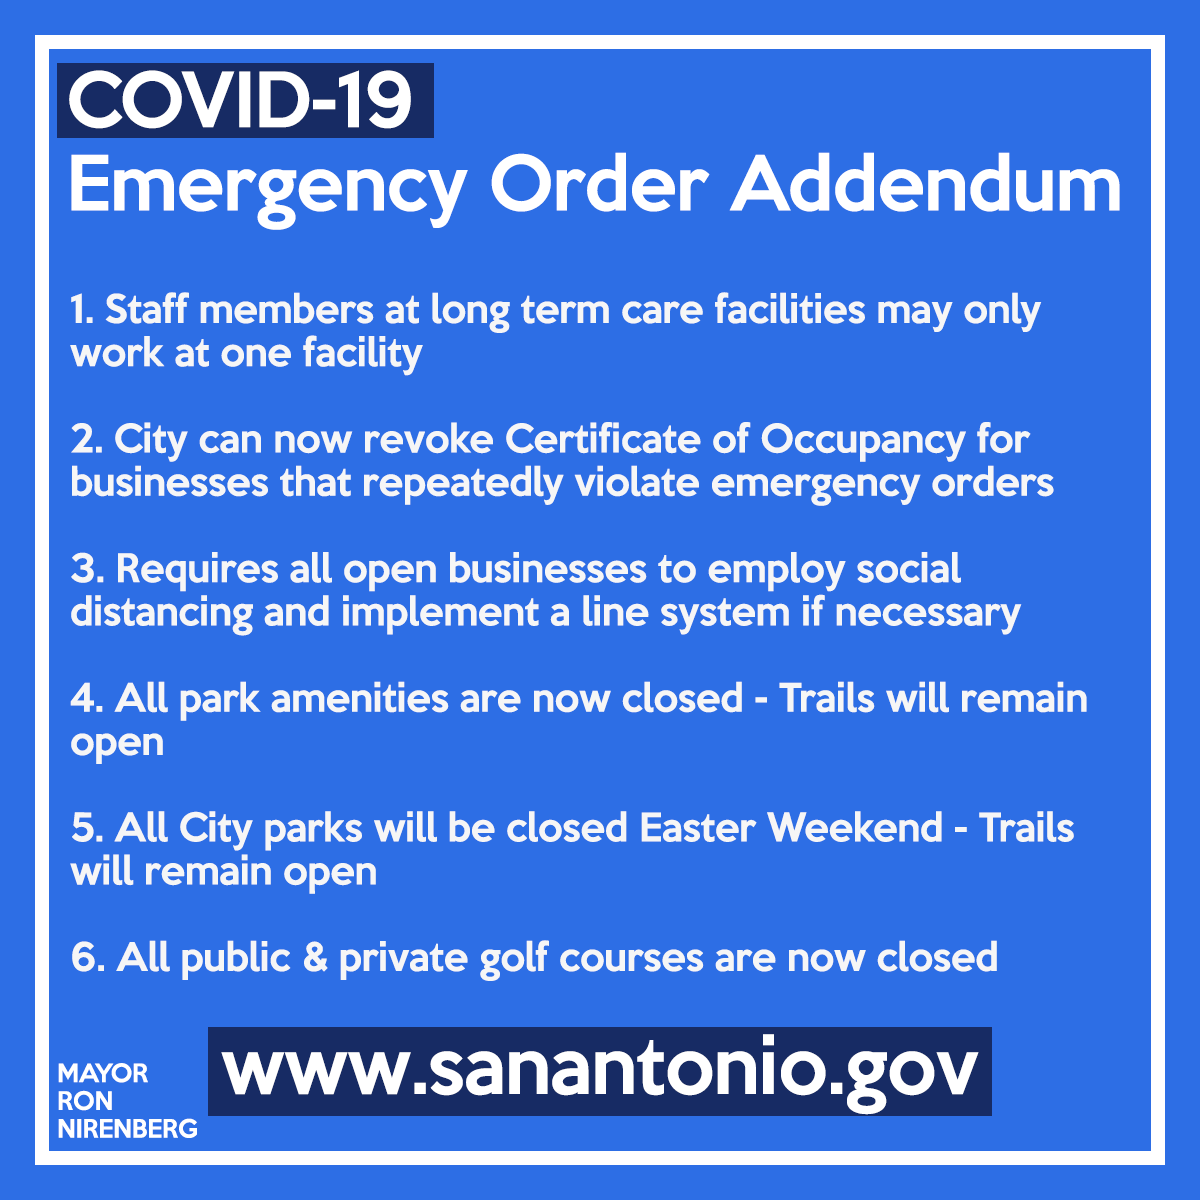 EMERGENCY ORDER EXTENSION - APRIL 30:Today, City Council voted to extend our emergency order through April 30.Emergency order:  https://www.sanantonio.gov/Portals/0/Files/health/COVID19/Website%20Docs/Emergency%20Declaration%20No.%205.pdfAddendum:  https://www.sanantonio.gov/Portals/0/Files/health/COVID19/Public%20Info/Fifth%20Declaration%20of%20Public%20Health%20Emergency%20Addendum.pdf13/15